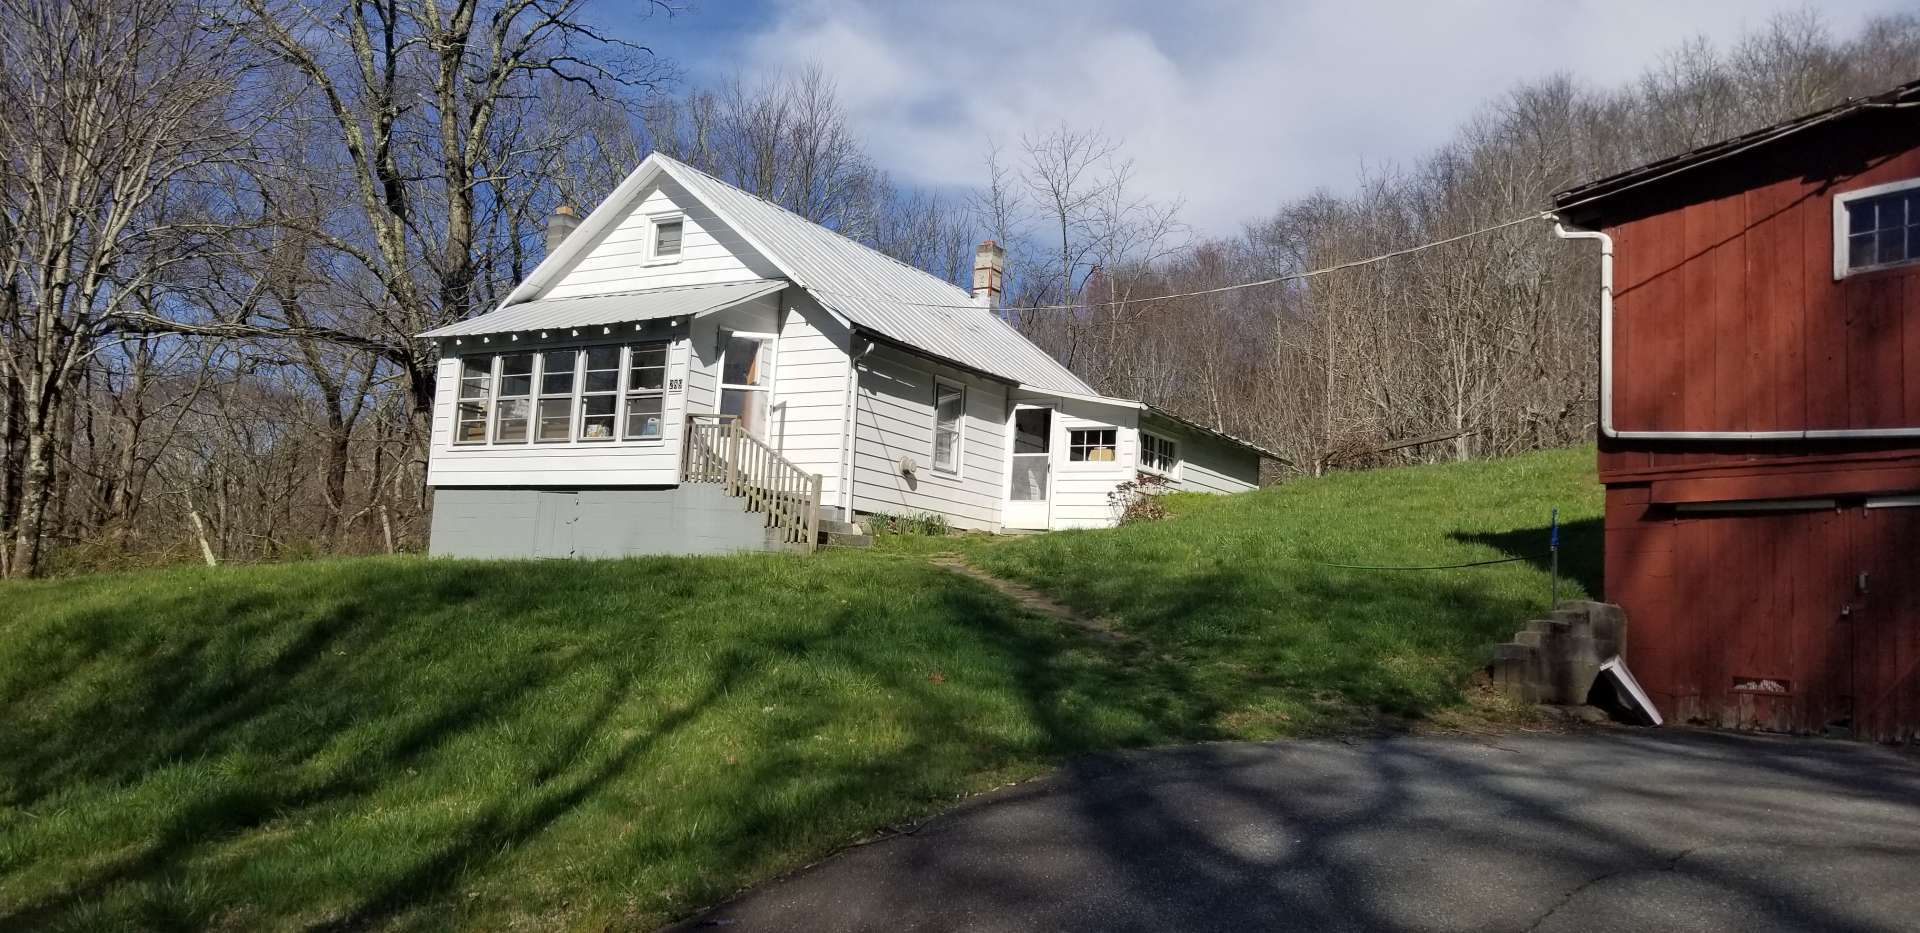 This  32+ acre farm located off of John's Mountain Road in Vilas area of Watauga County in the North Carolina mountains is perfect for your  farming interests, mountain estate, or investment property.  Call today for additional information on listing H173.